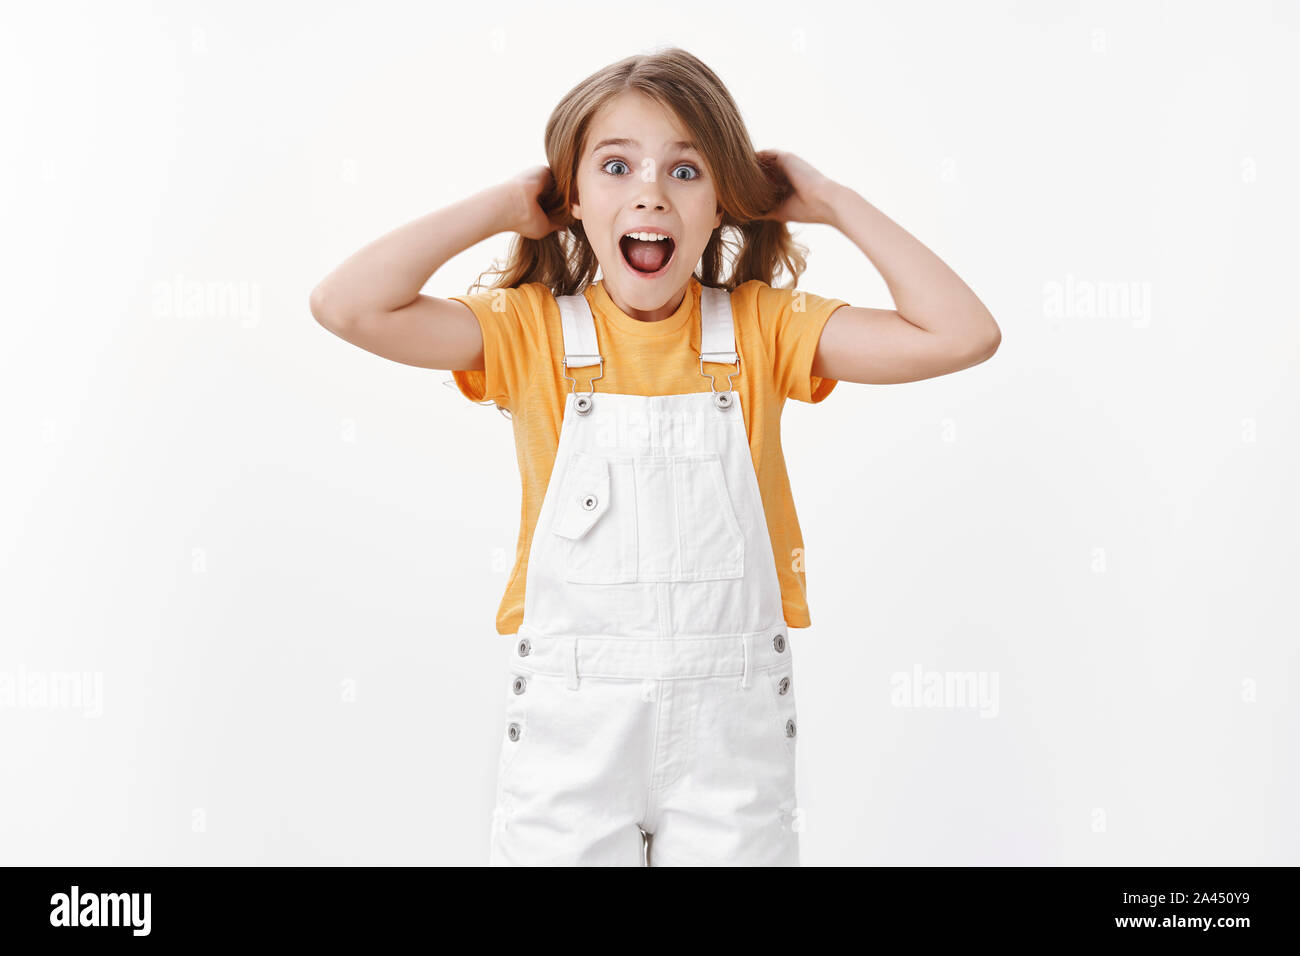 Happy excited child having fun, standing playful and surprised, girl touching hair lifting haircut in air, shouting amused and joyful, express enthusi Stock Photo